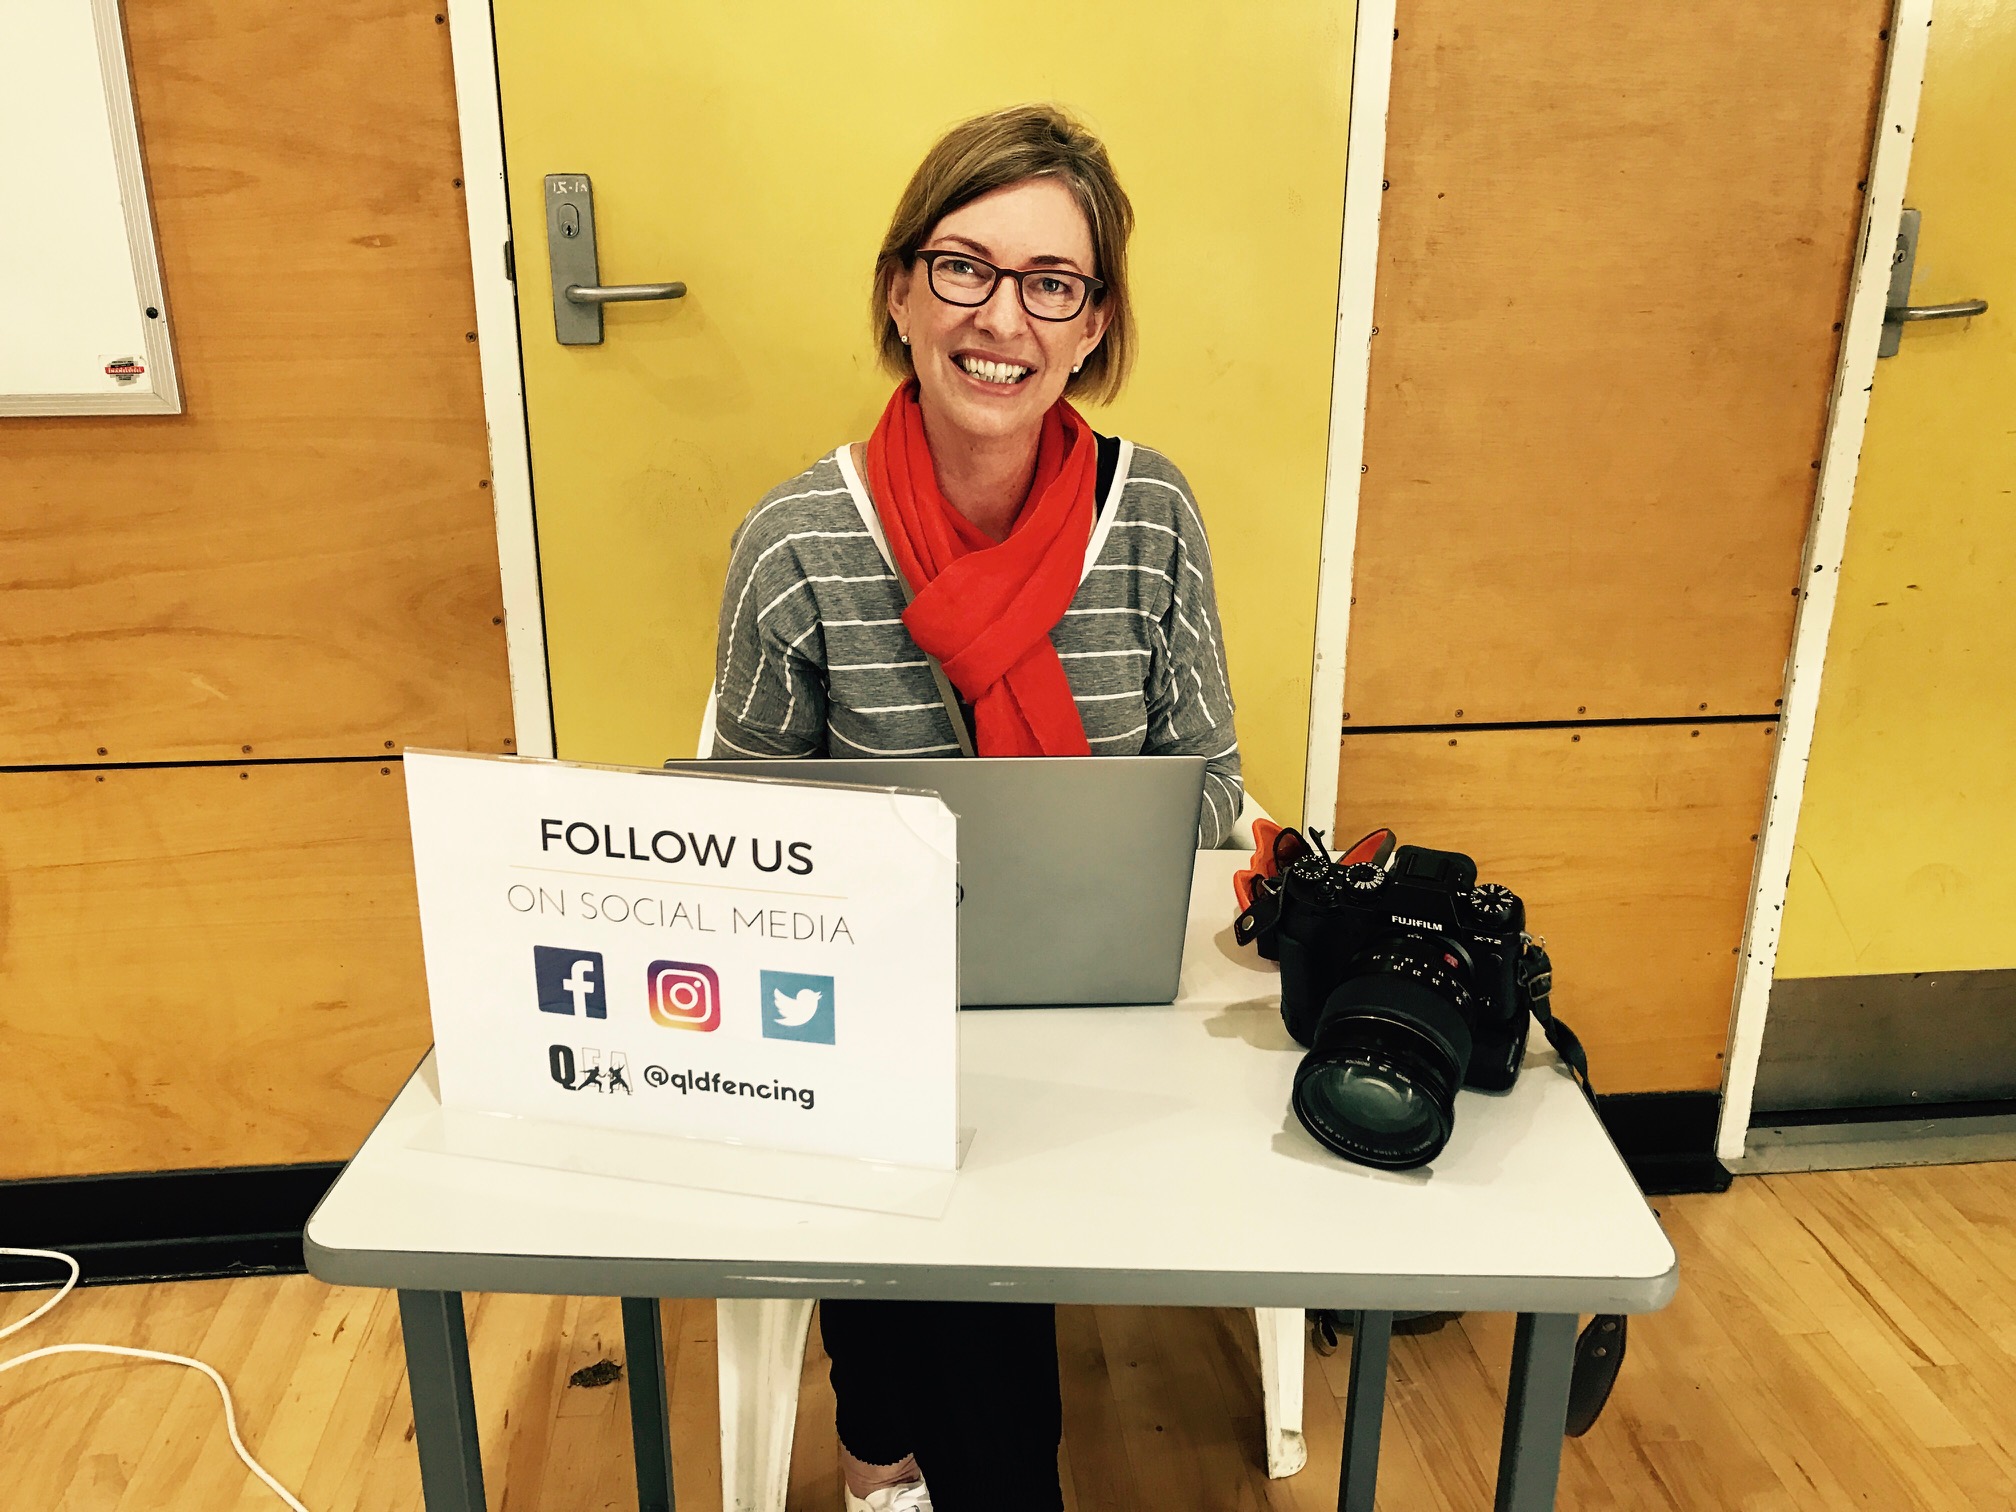 A woman wearing black-rimmed glasses and an orange scarf sits at a table behind an open laptop computer. There is a digital camera on the table and a sign with social media icons and the text 'follow us'. The woman is looking out and smiling.